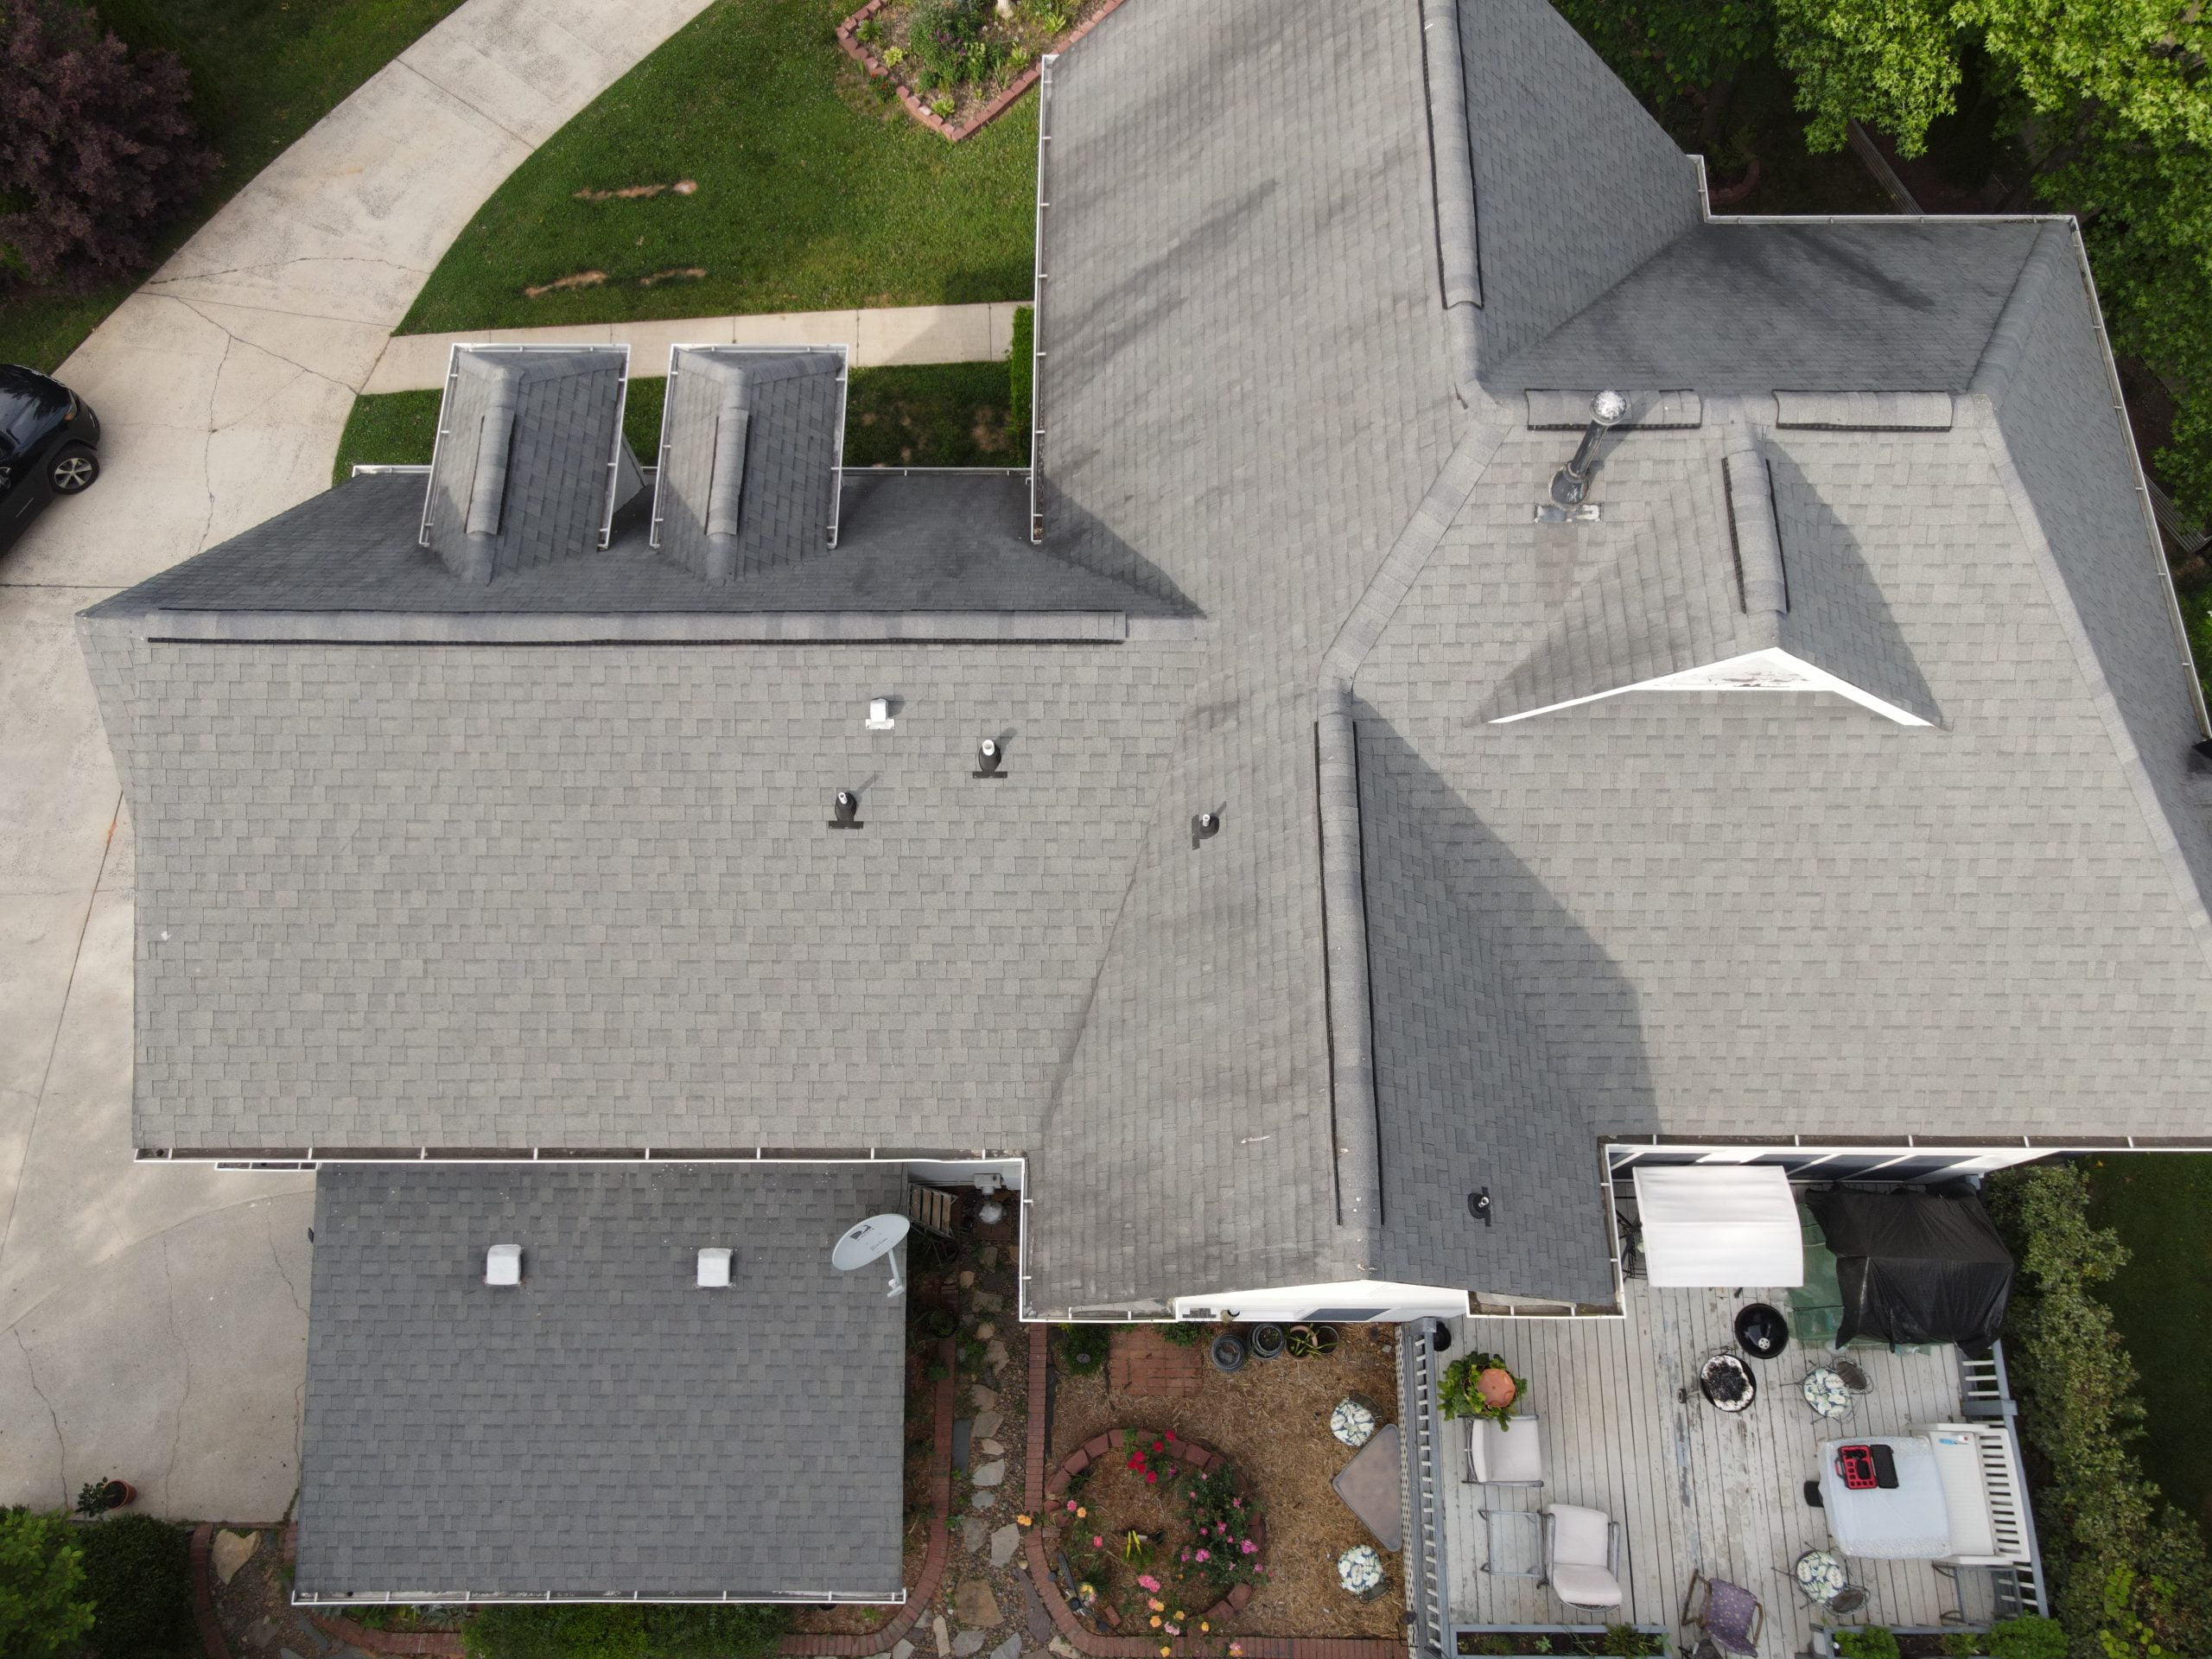 Pensacola Roof Inspection, Drone Roof Inspection, Roofing Pensacola, Florida Drone Services, Pensacola Drone Inspection, Roof Maintenance, Roof Damage,